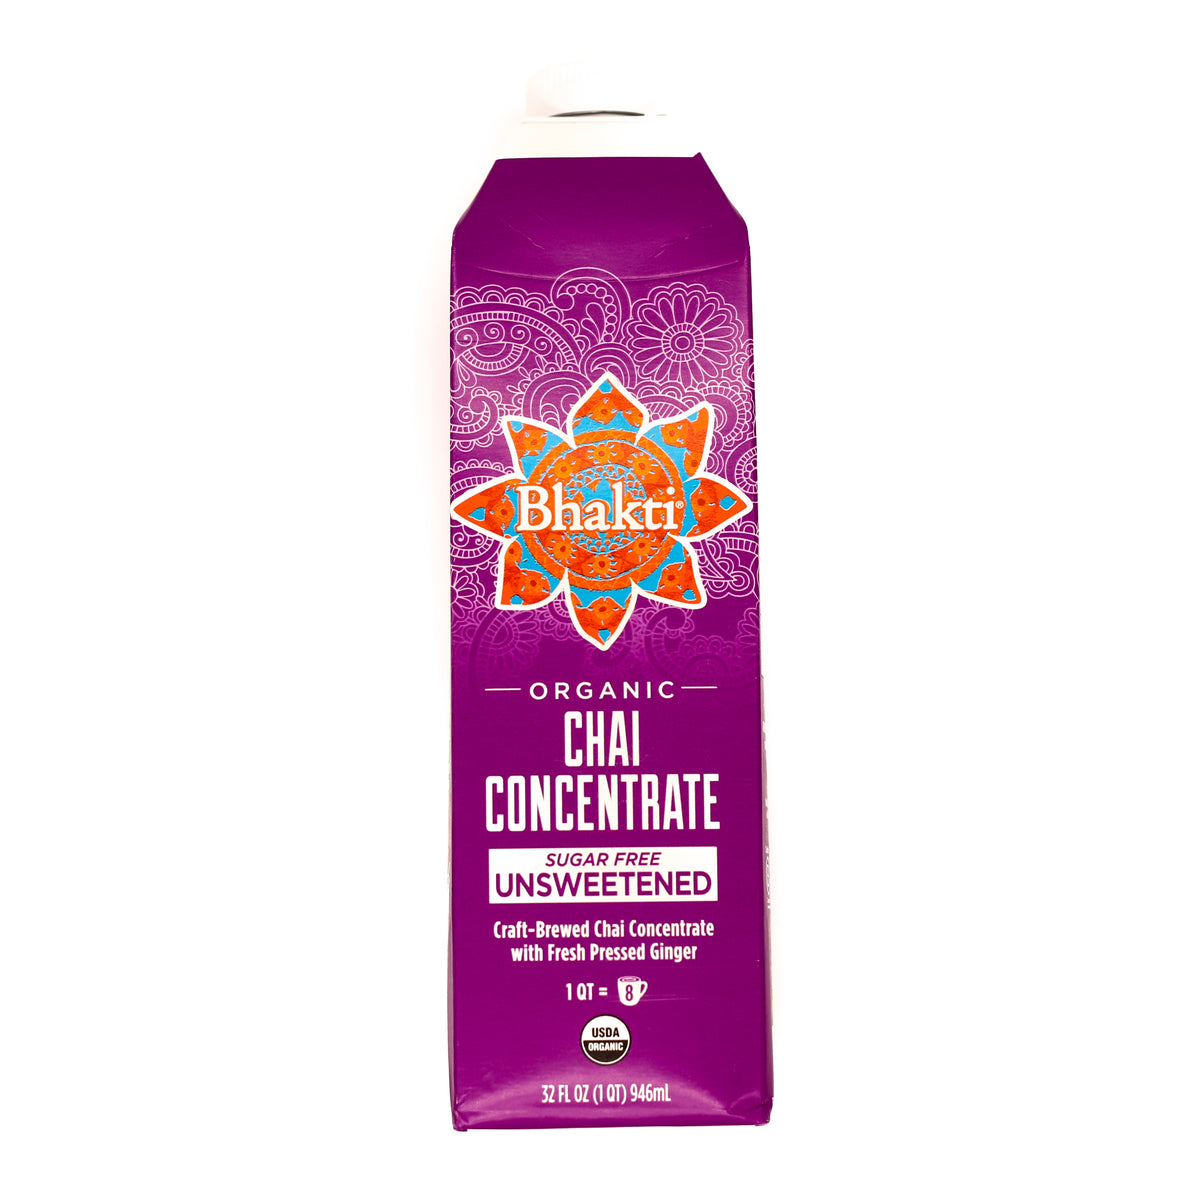 Bhakti Chai Concentrate Unsweetened